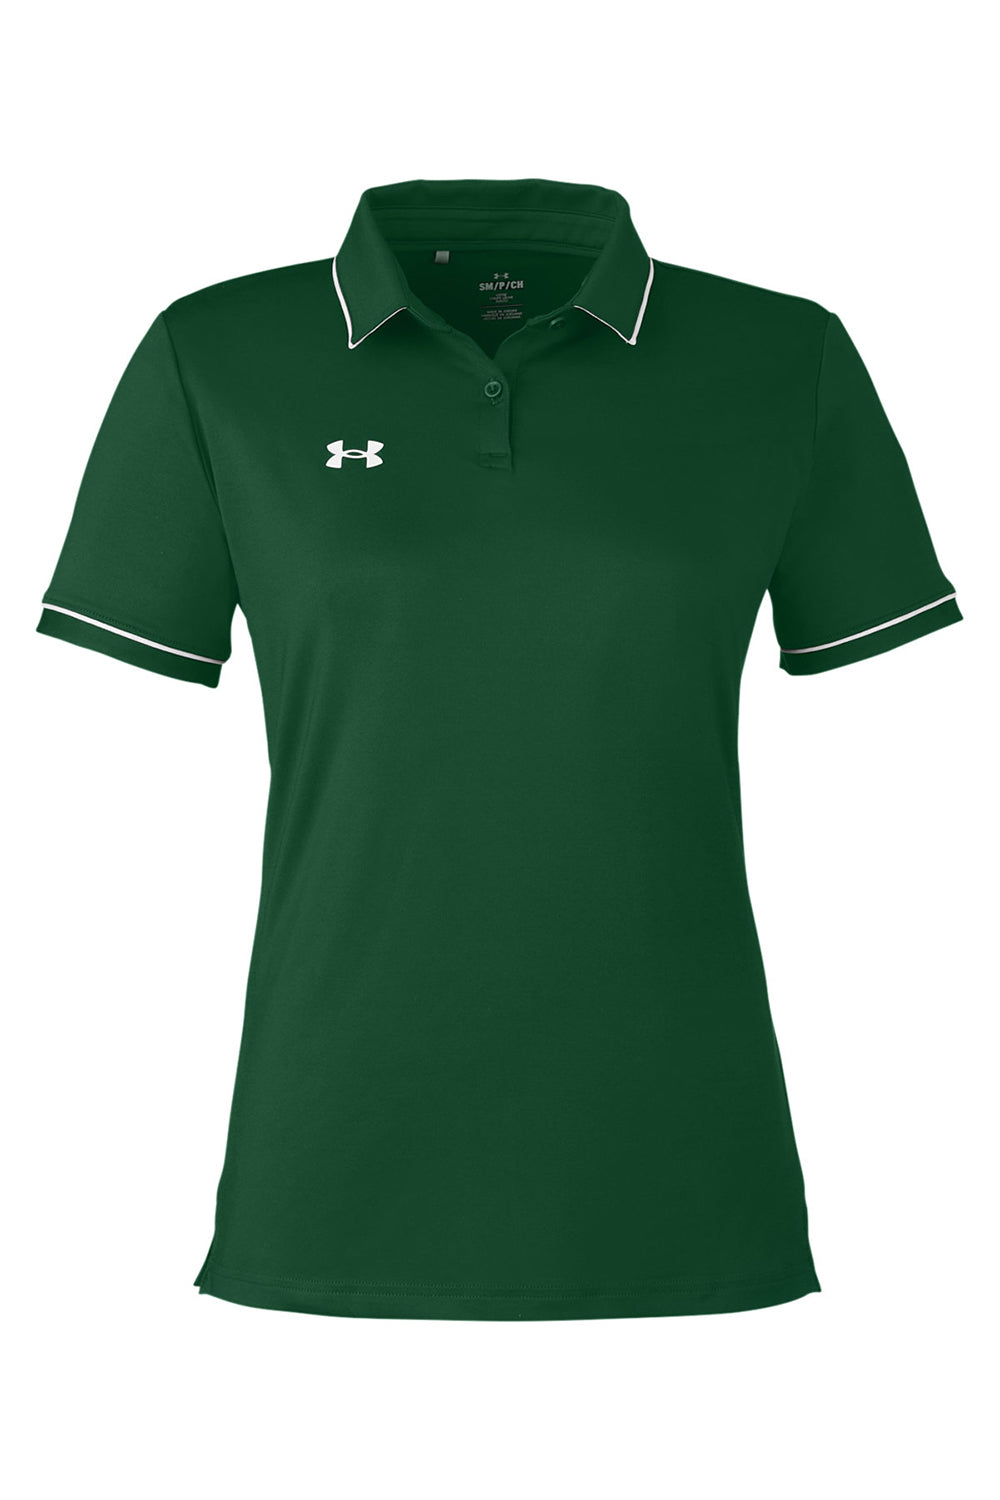 Under Armour 1376905 Womens Teams Performance Moisture Wicking Short Sleeve Polo Shirt Forest Green Flat Front